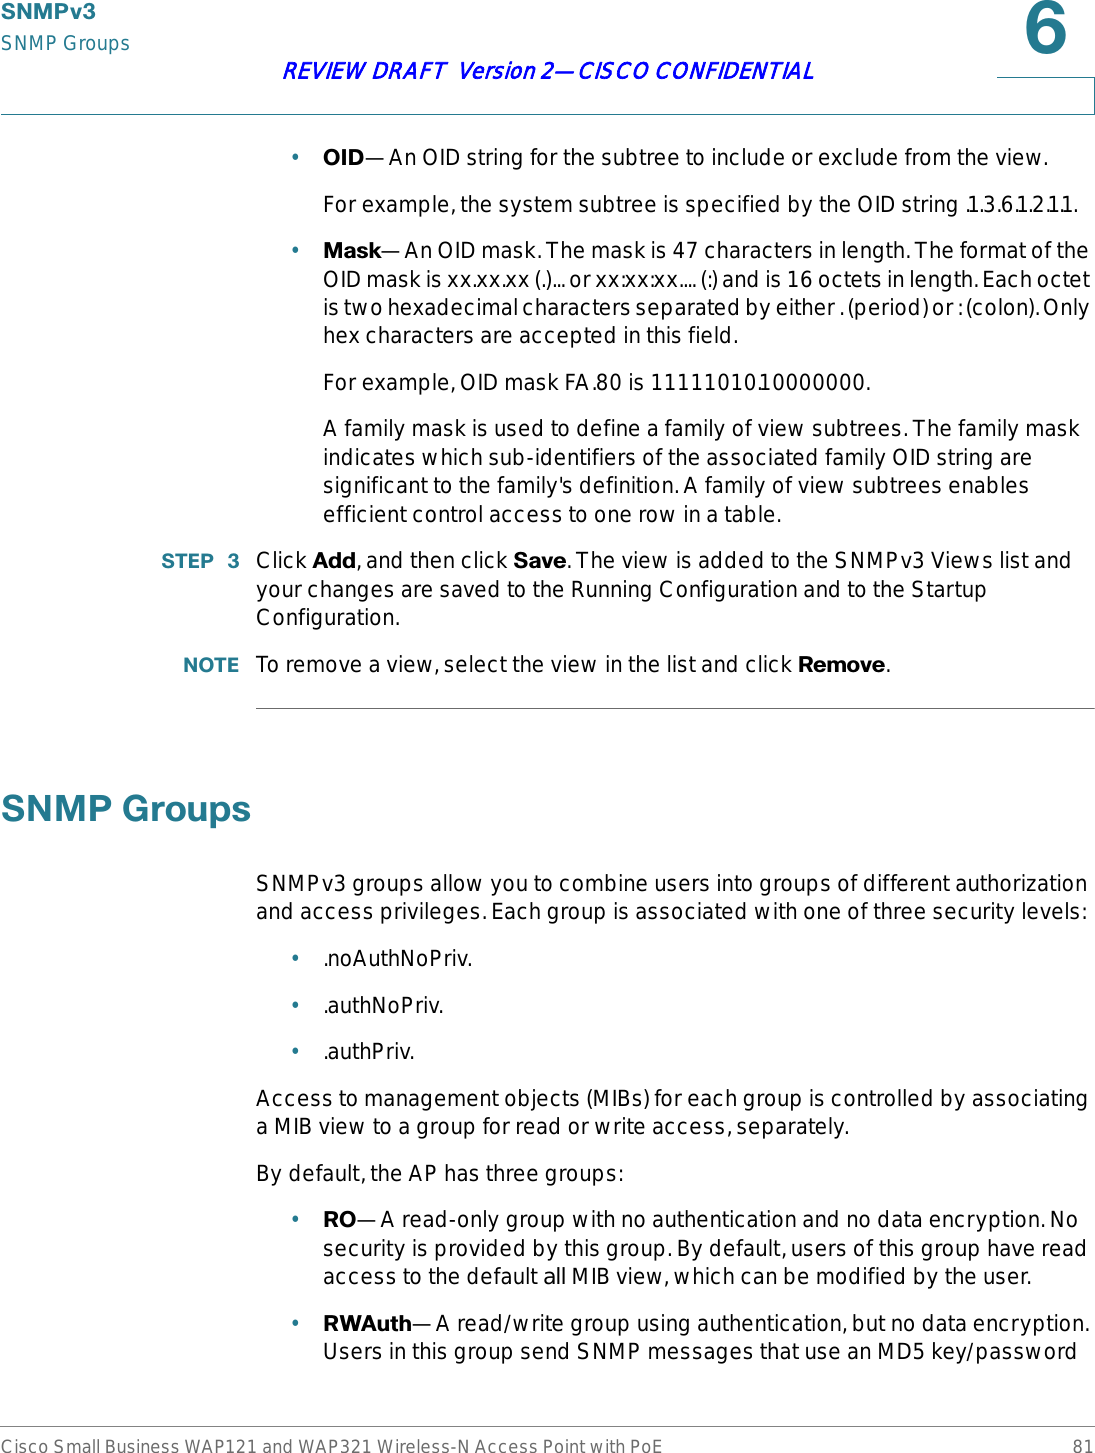 6103YSNMP GroupsCisco Small Business WAP121 and WAP321 Wireless-N Access Point with PoE 81REVIEW DRAFT  Version 2—CISCO CONFIDENTIAL•2,&apos;—An OID string for the subtree to include or exclude from the view. For example, the system subtree is specified by the OID string .1.3.6.1.2.1.1. •0DVN—An OID mask. The mask is 47 characters in length. The format of the OID mask is xx.xx.xx (.)... or xx:xx:xx.... (:) and is 16 octets in length. Each octet is two hexadecimal characters separated by either . (period) or : (colon). Only hex characters are accepted in this field. For example, OID mask FA.80 is 11111010.10000000.A family mask is used to define a family of view subtrees. The family mask indicates which sub-identifiers of the associated family OID string are significant to the family&apos;s definition. A family of view subtrees enables efficient control access to one row in a table.67(3  Click $GG, and then click 6DYH. The view is added to the SNMPv3 Views list and your changes are saved to the Running Configuration and to the Startup Configuration.127( To remove a view, select the view in the list and click 5HPRYH.6103*URXSVSNMPv3 groups allow you to combine users into groups of different authorization and access privileges. Each group is associated with one of three security levels:•.noAuthNoPriv.•.authNoPriv.•.authPriv.Access to management objects (MIBs) for each group is controlled by associating a MIB view to a group for read or write access, separately.By default, the AP has three groups:•52—A read-only group with no authentication and no data encryption. No security is provided by this group. By default, users of this group have read access to the default all MIB view, which can be modified by the user. •5:$XWK—A read/write group using authentication, but no data encryption. Users in this group send SNMP messages that use an MD5 key/password 